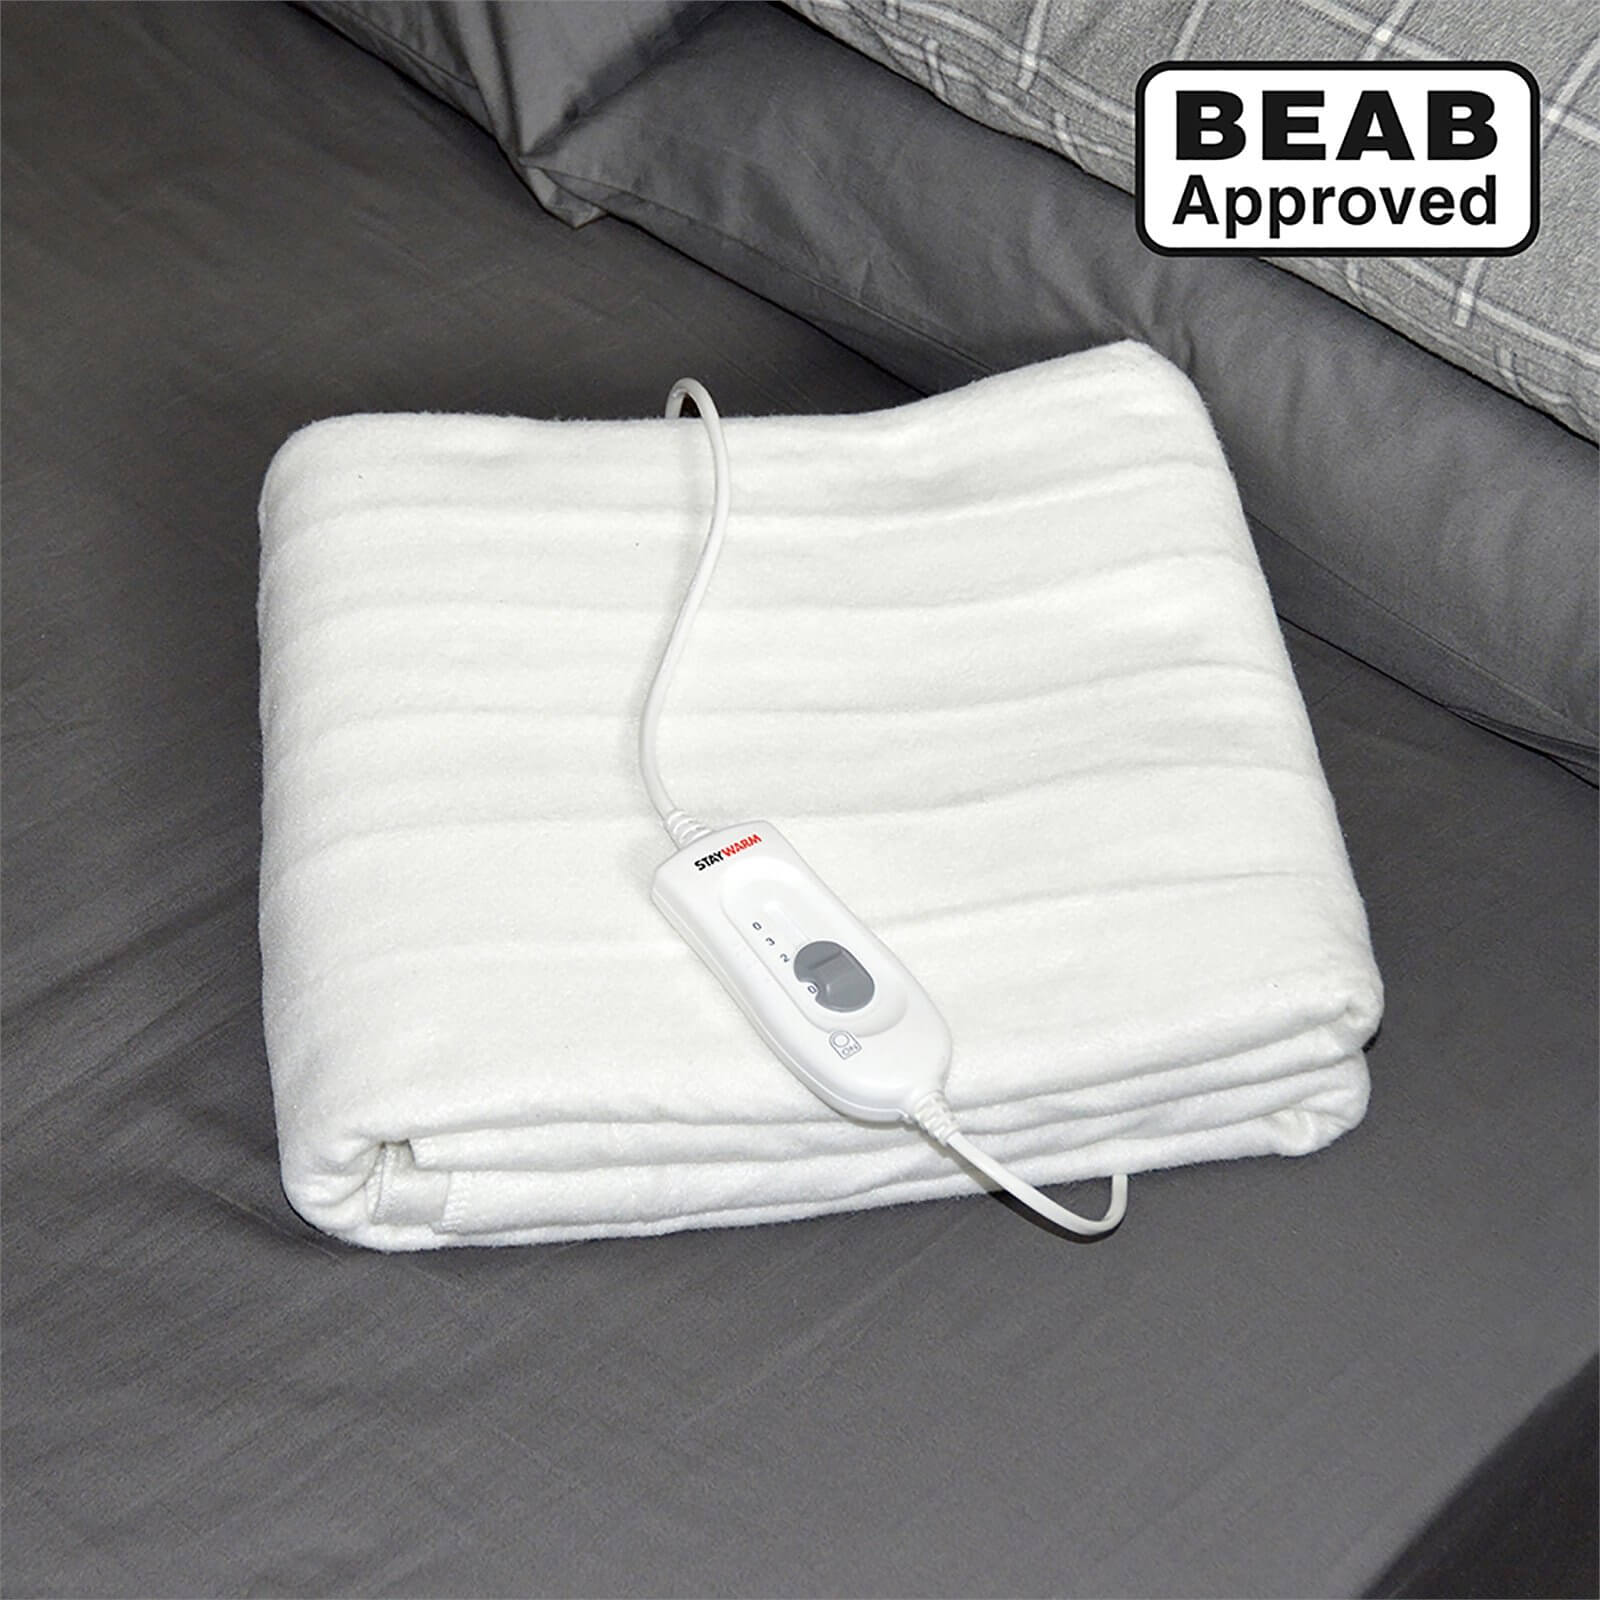 StayWarm Superior Electric Blanket - Single (BEAB Approved)